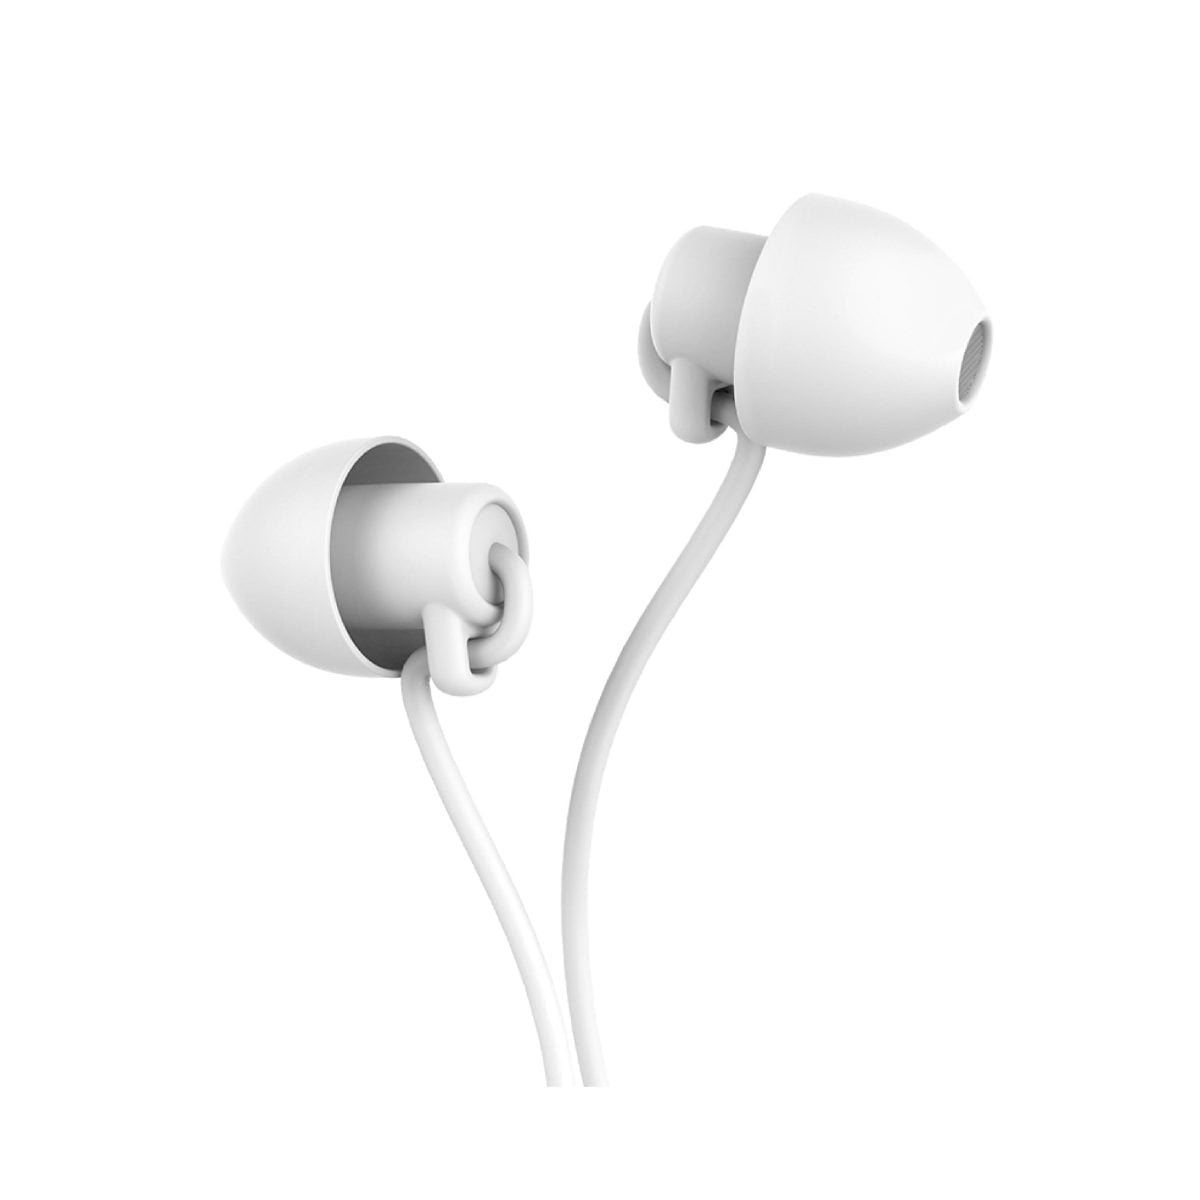 Earphone98 03 Scaled Hoco Material: Silica Gel, Tpe Enameled Wire Length: 1.2M, Weight: 10G Speaker: 6Mm Connector: 3.5Mm Microphone: With A Wheat Controller Wire Control: Single Button Control Silicone Material, Soft And Does Not Oppress The Ear, Suitable For Sleeping Silicon Sleep Earphones M56 Earphone Wired Headphones With Mic – White